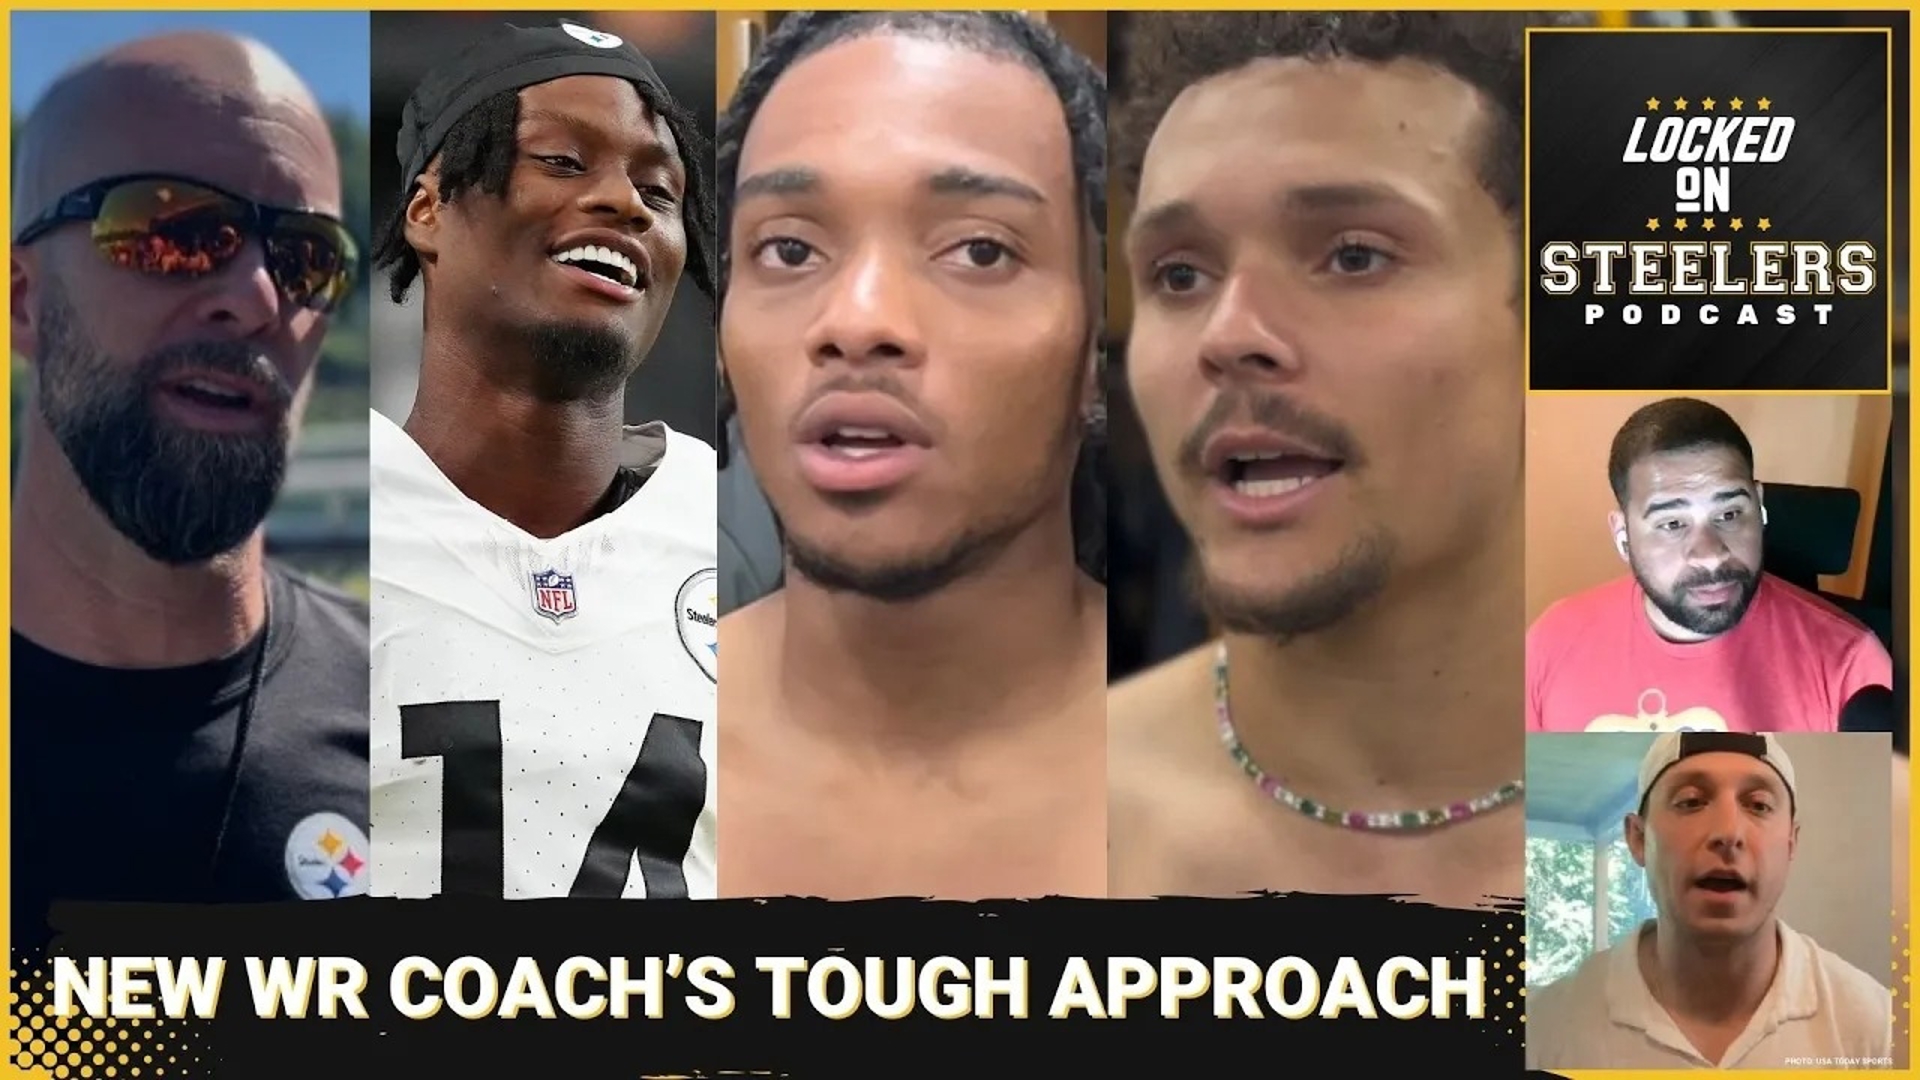 The Pittsburgh Steelers' new wide receivers coach Zach Azzanni has taken a hard coaching style approach to challenge the team's yound receivers.